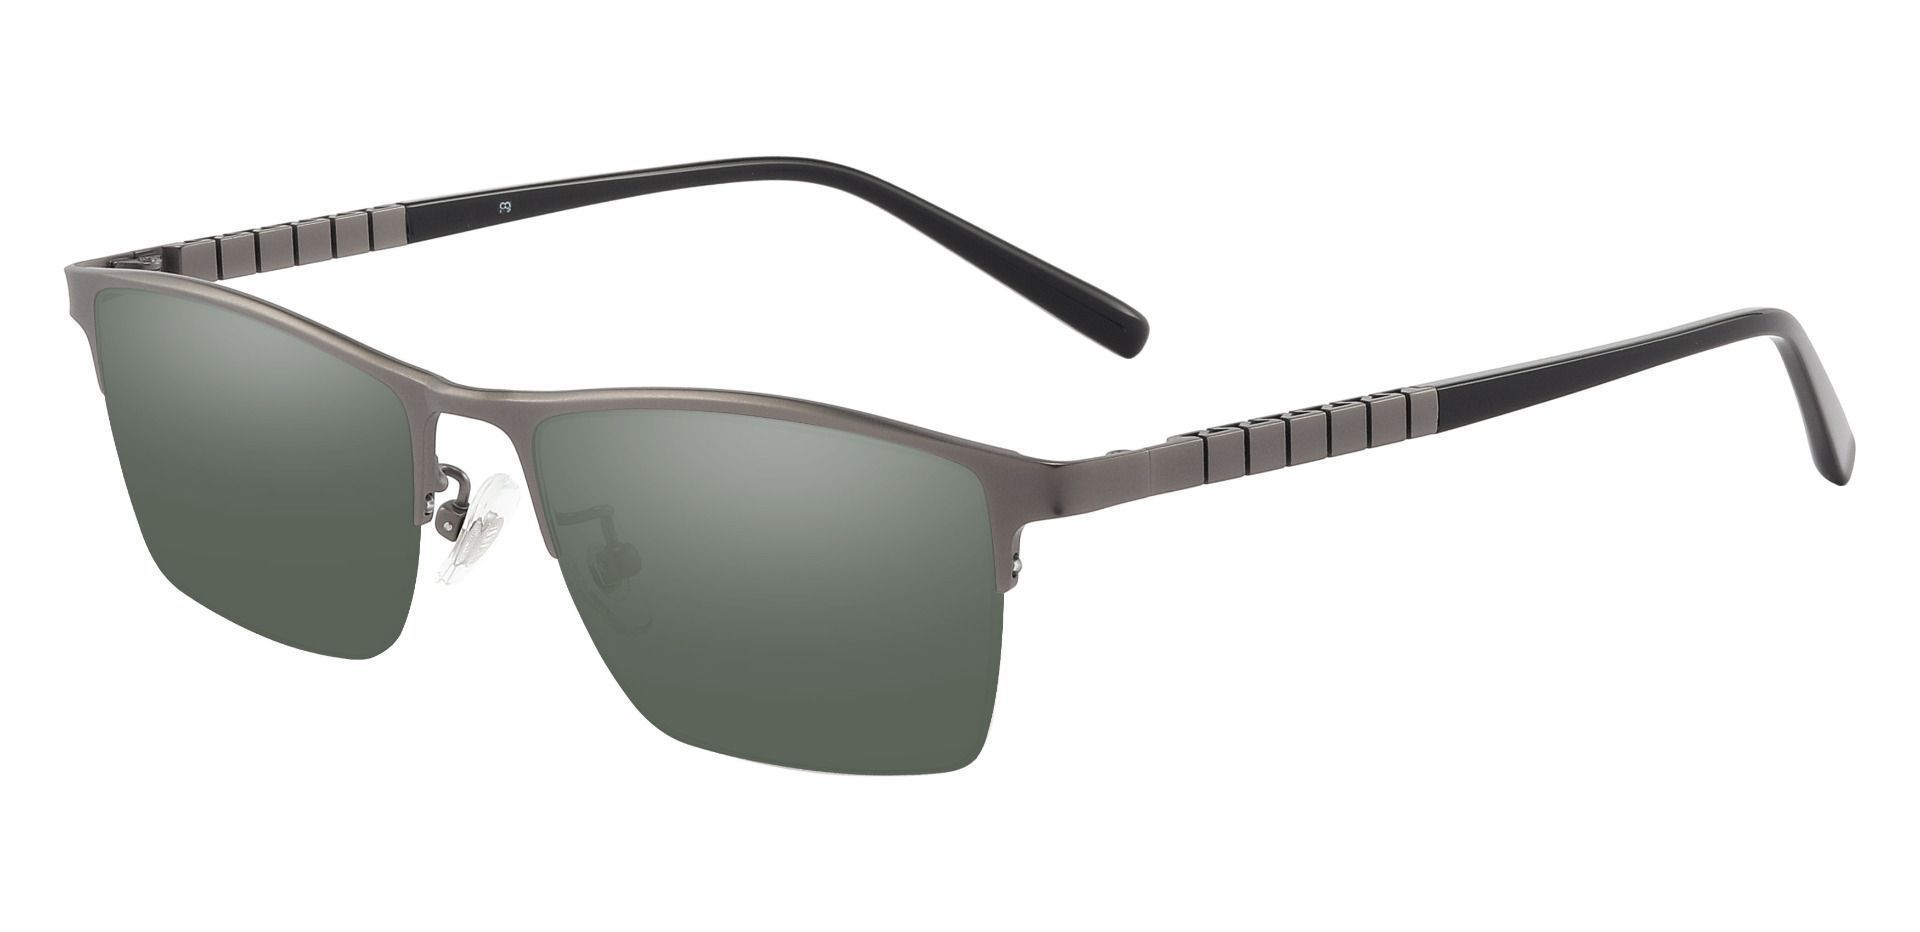 Maine Rectangle Reading Sunglasses - Gray Frame With Green Lenses